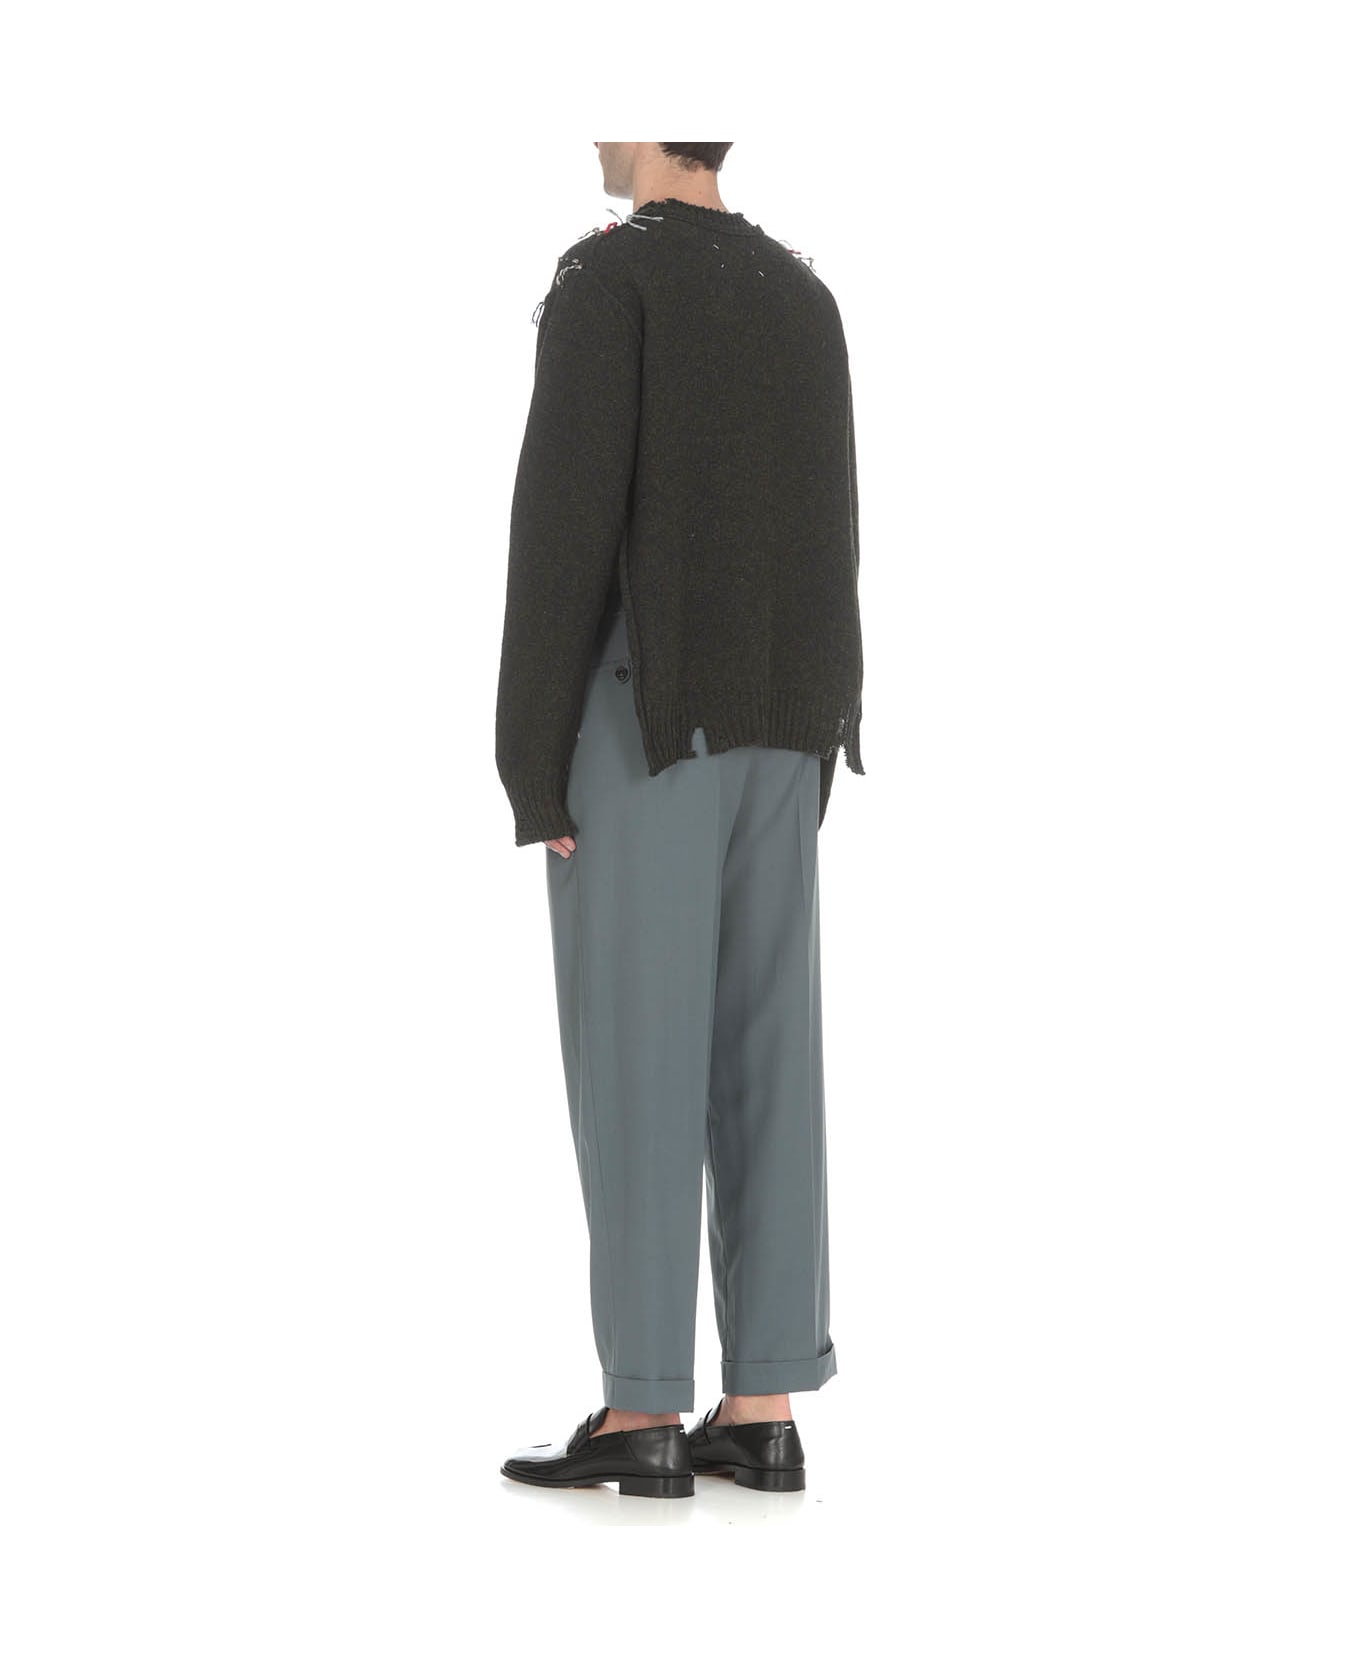 Maison Margiela Sweater With Cut-out Details - Green